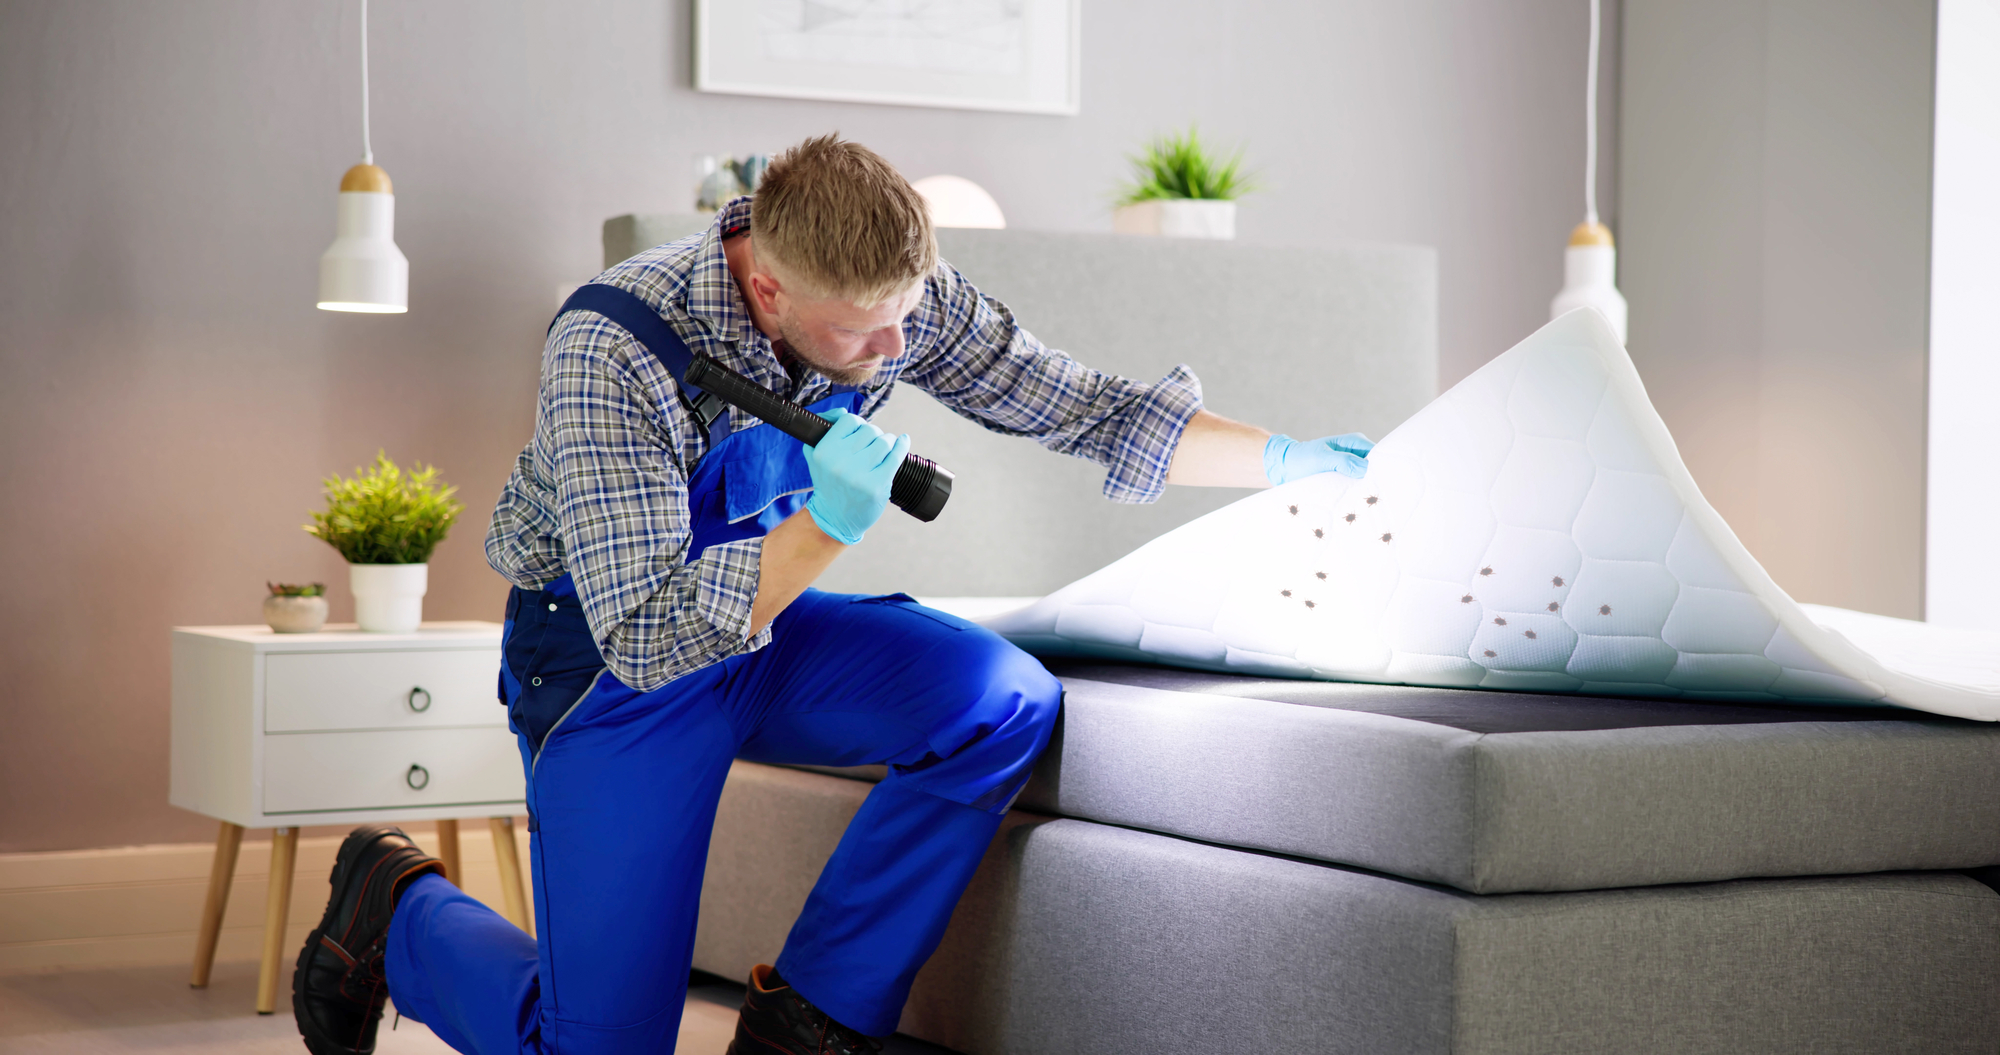 Bed Bug Infestation And Treatment Service. Bugs Exterminator in Atlanta